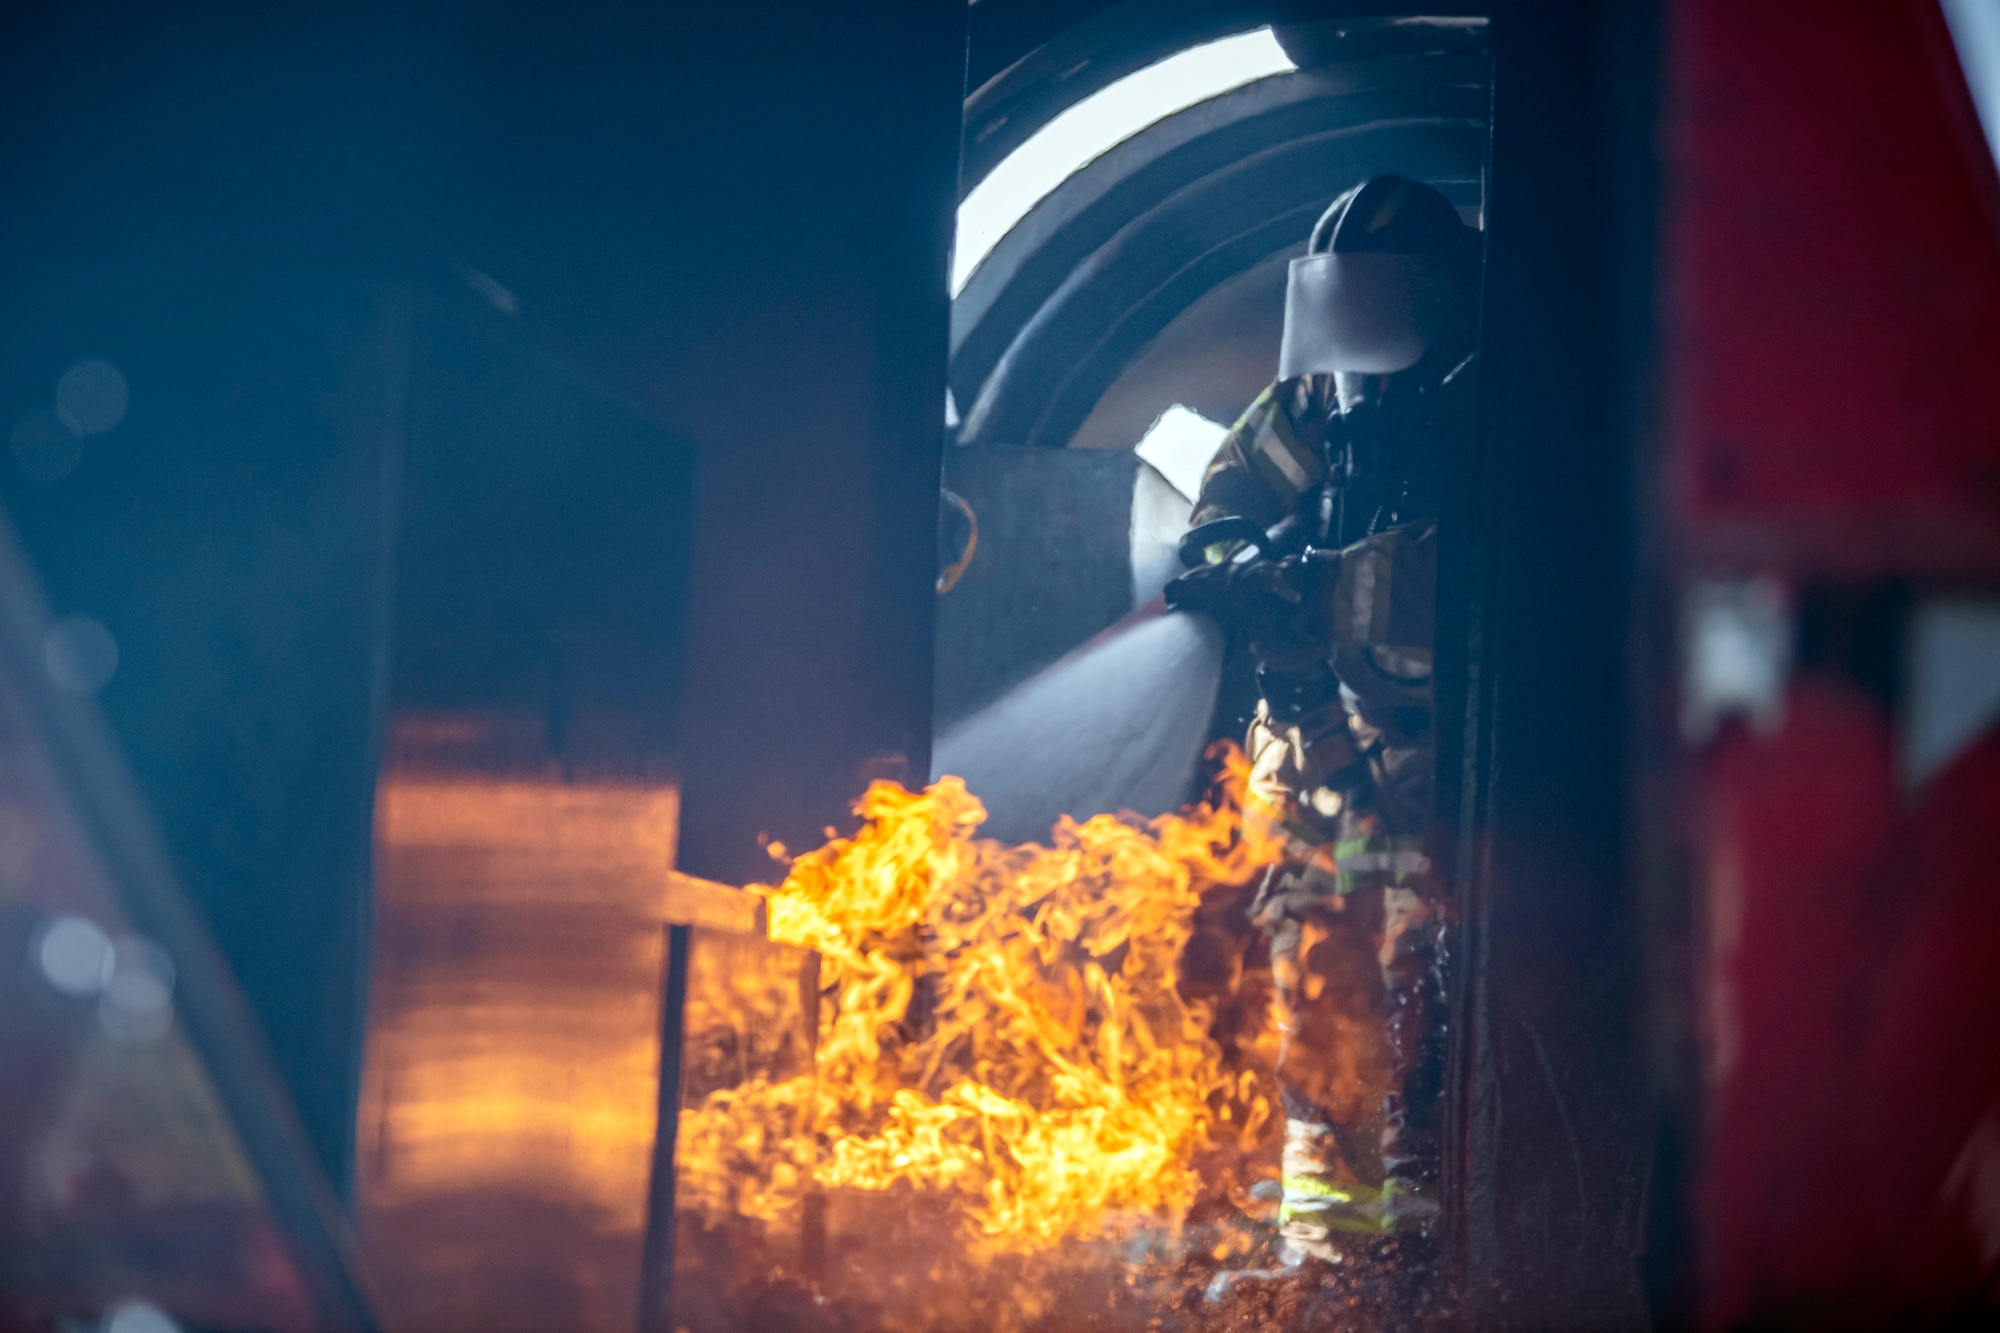 A firefighter from the 422d Fire Emergency Services extinguishes an aircraft fire during a live-fire training exercise at RAF Fairford, England, Oct. 3, 2022. Firefighters from the 422d FES are required to complete live-fire training bi-annually to test their overall readiness and ability to properly extinguish an aircraft fire. (U.S. Air Force photo by Staff Sgt. Eugene Oliver)